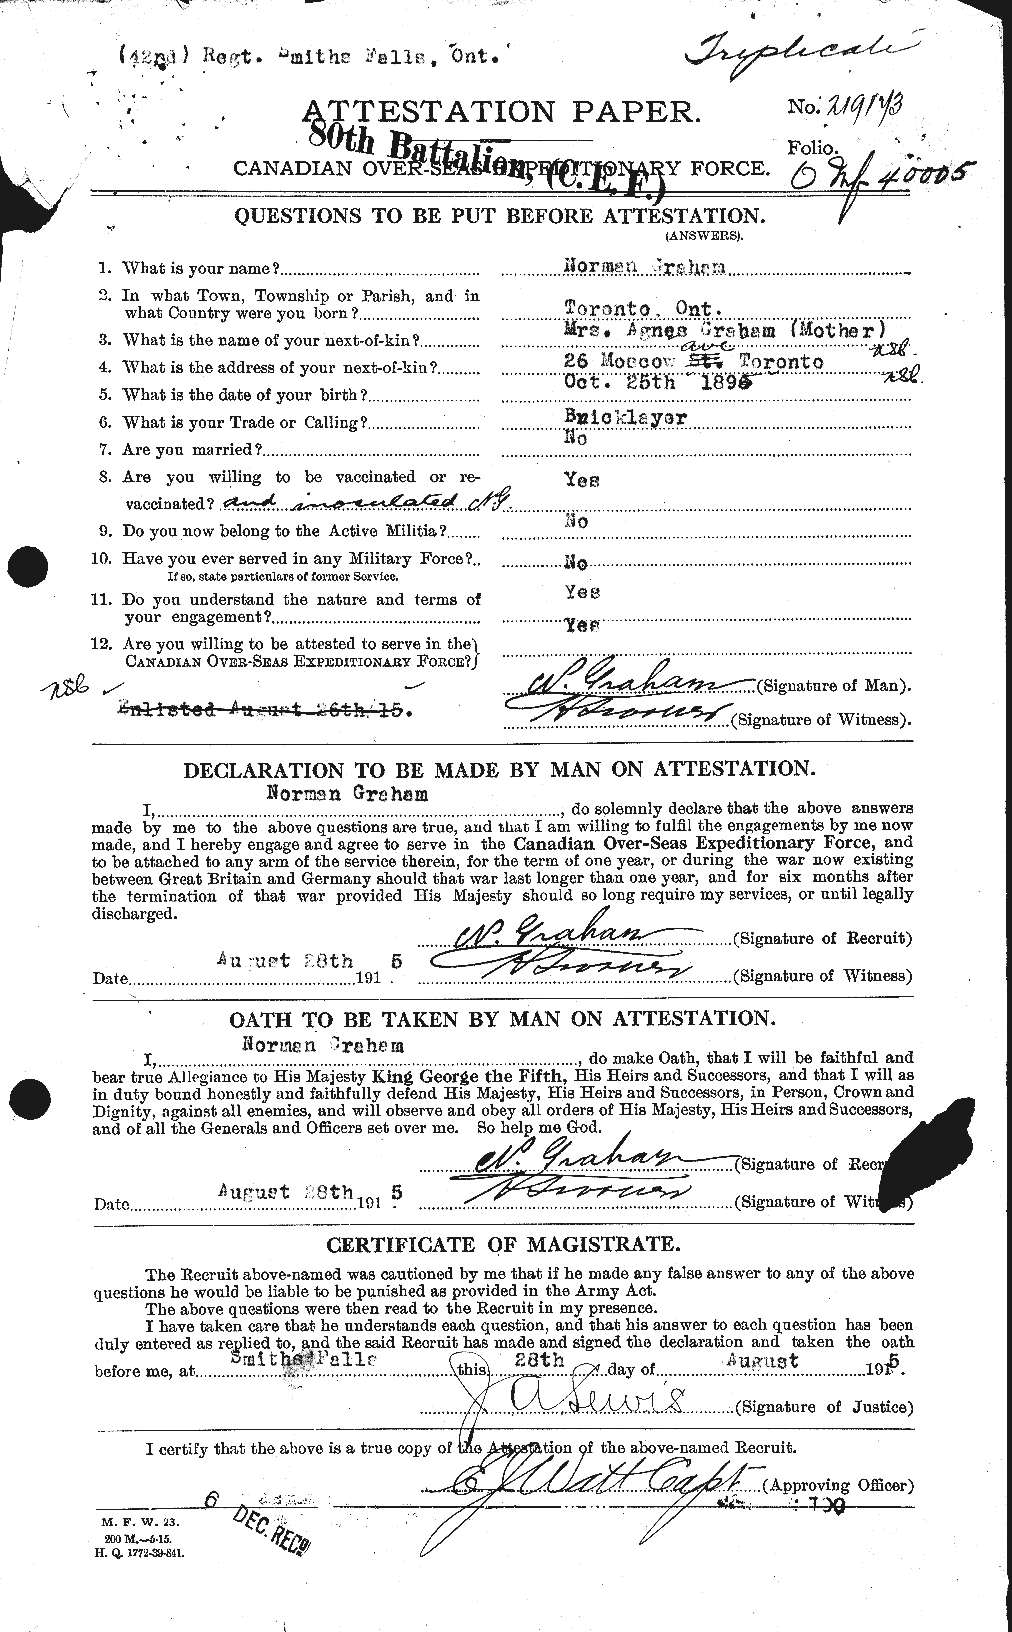 Personnel Records of the First World War - CEF 359318a